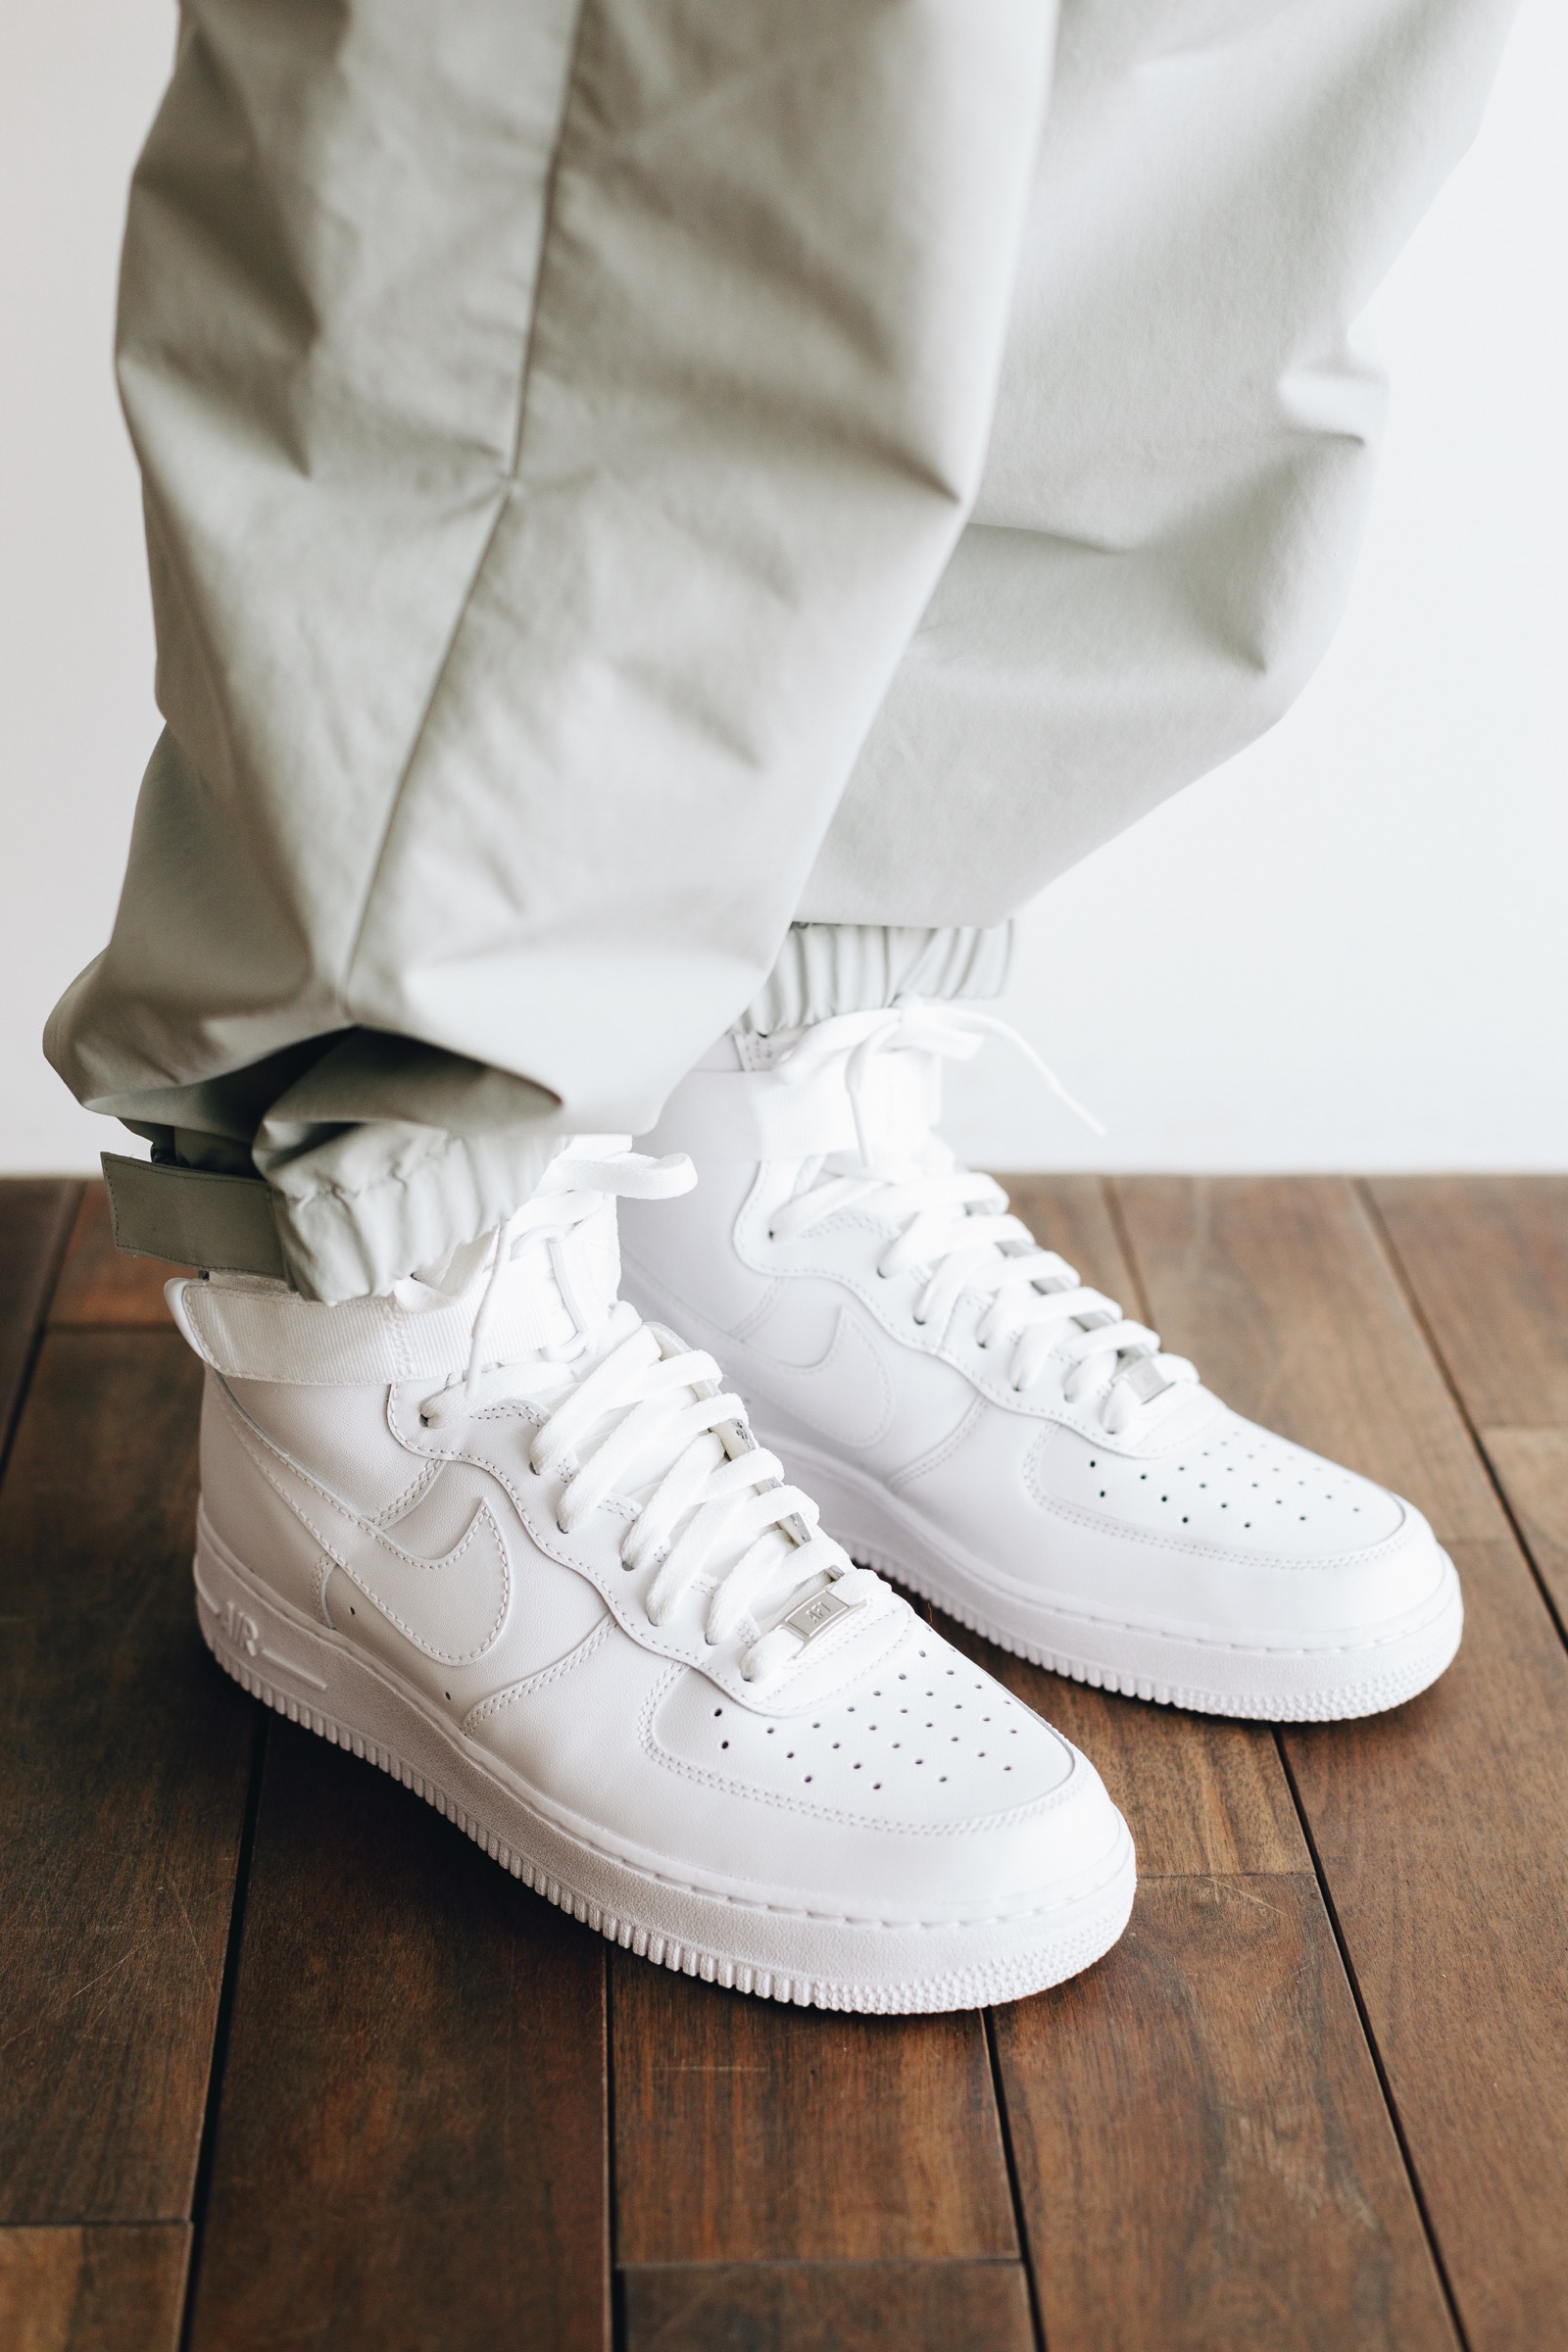 NIKE AIR FORCE 1 HIGH '07をレビューします - ESSENCE ONLINE STORE ブログ